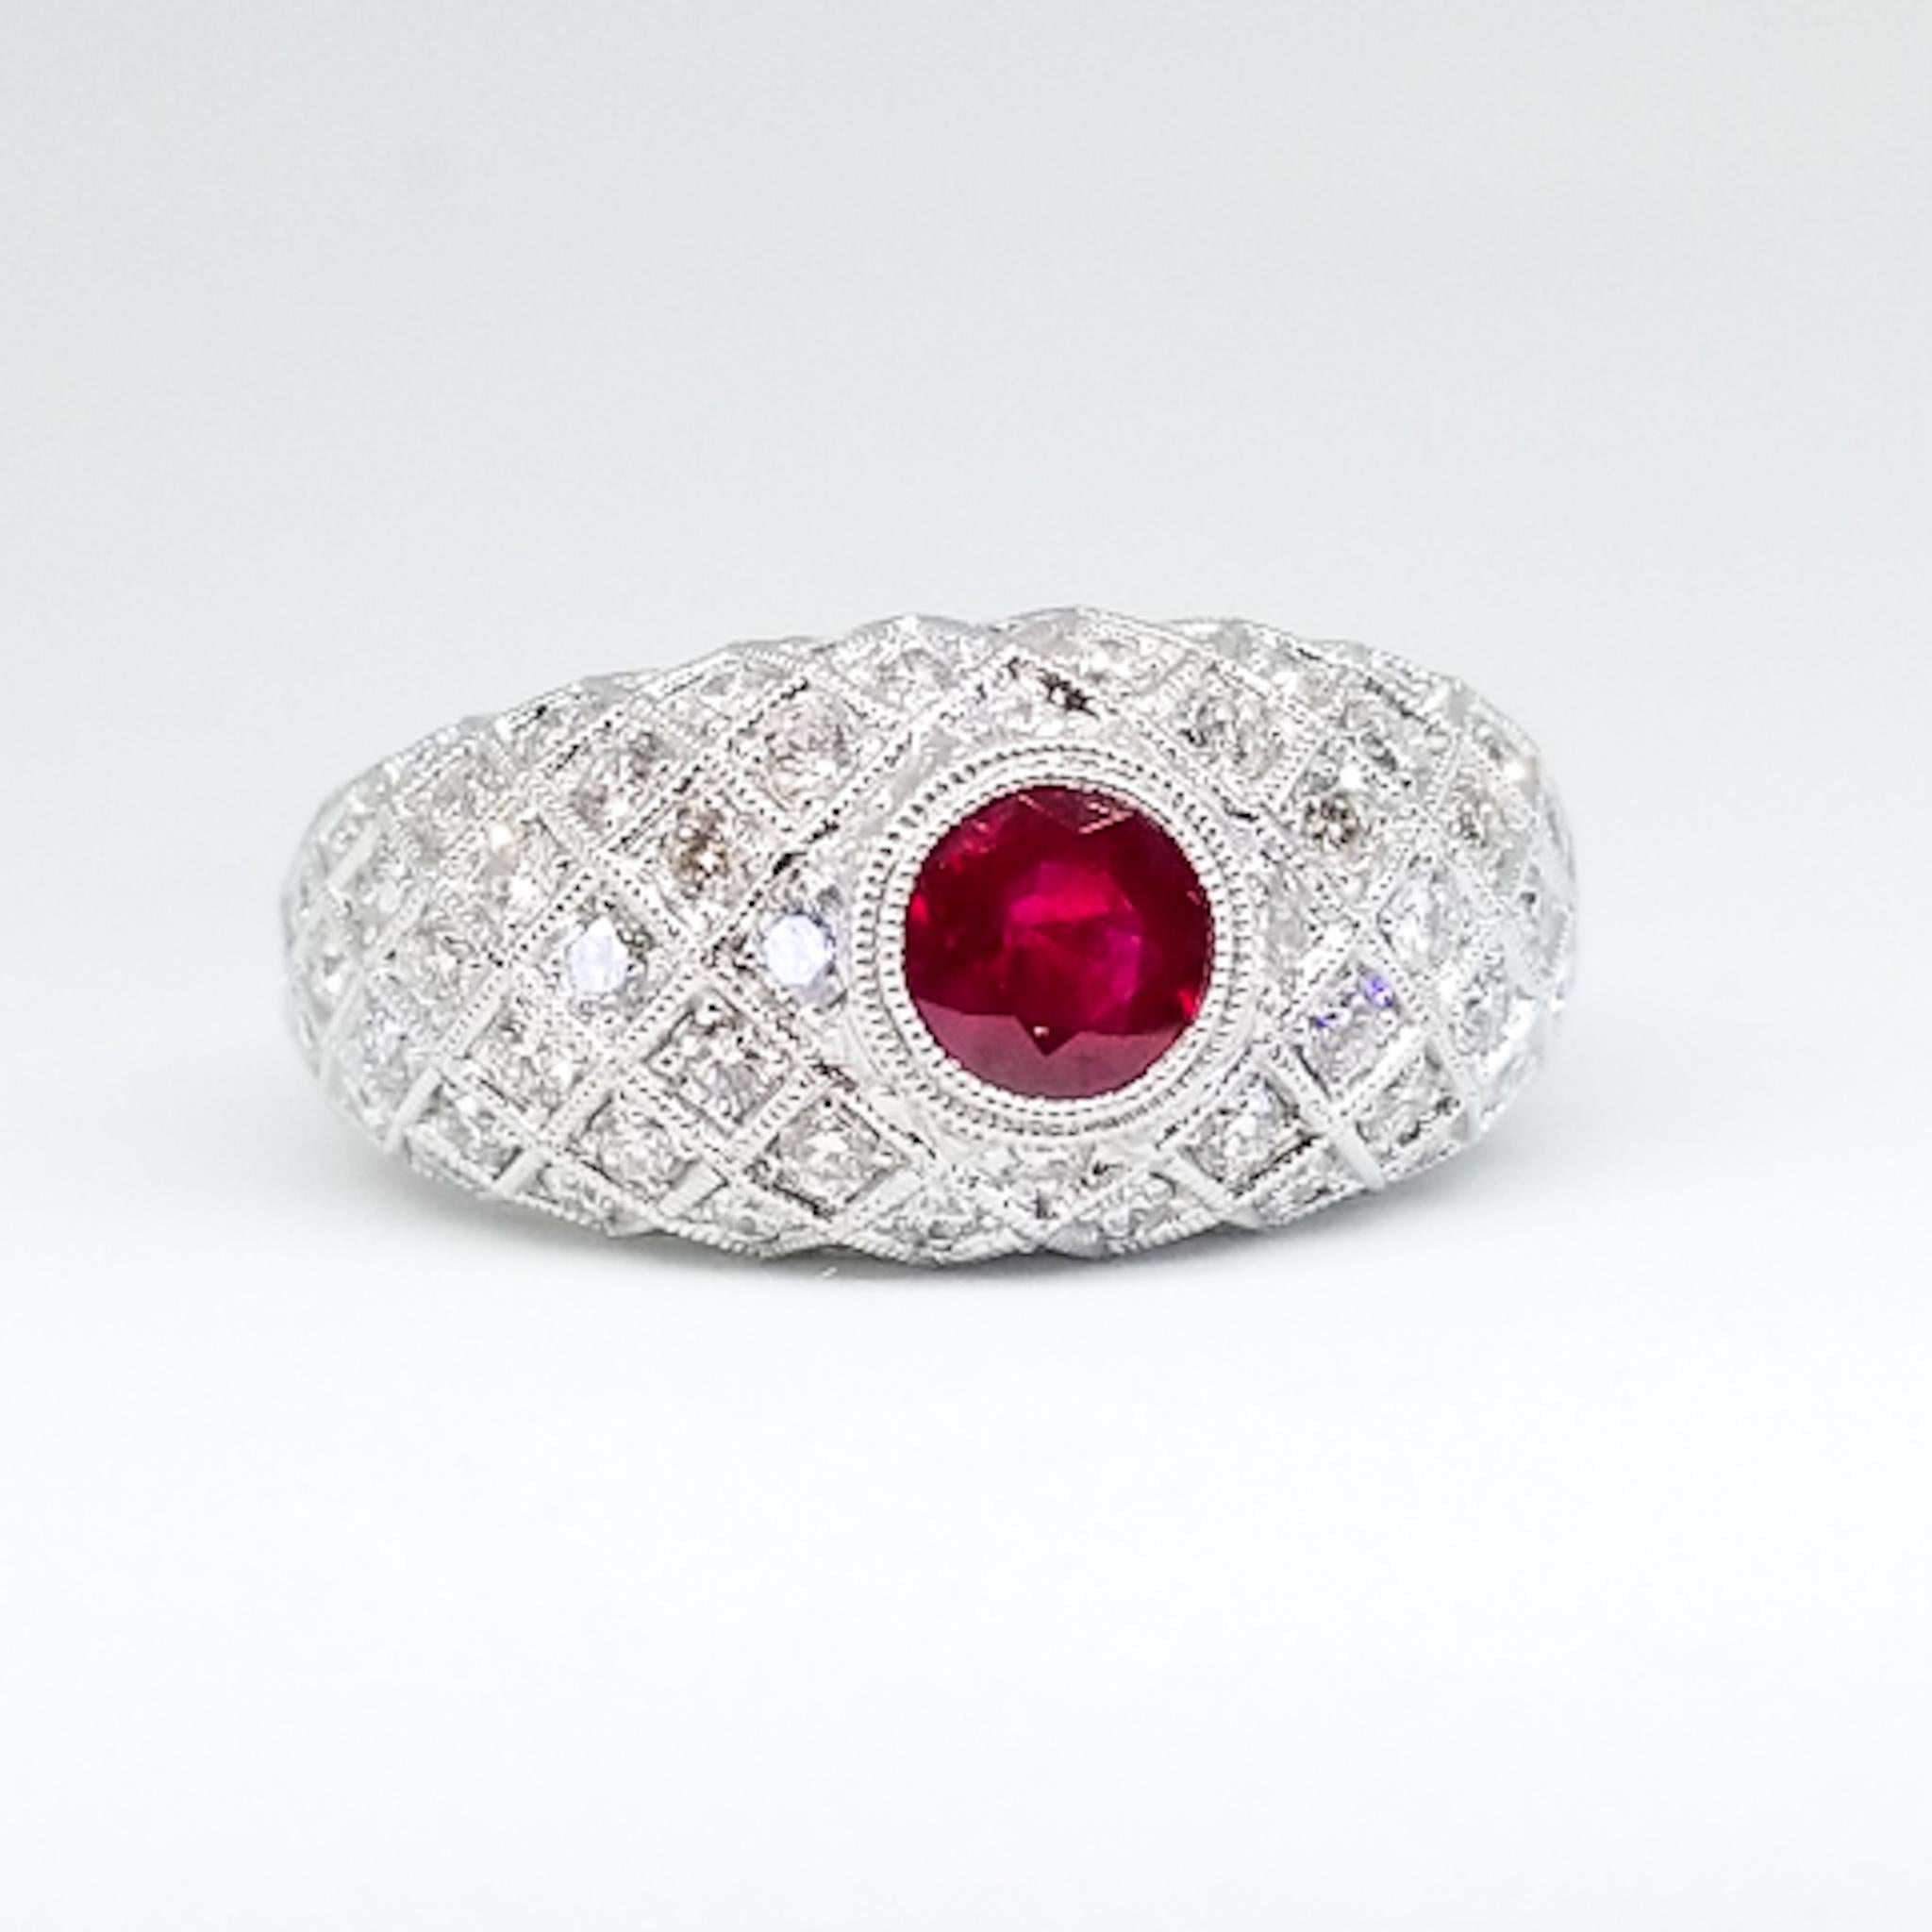 An Art Deco Inspired Engagement, Anniversary or Right Hand Ring is set with a 0.72 Carat Round Ruby with Rich Burma Red Color Saturation. The Unheated, Gem Quality stone is set low in the Band Style Ring in a protective bezel of Hand Millegrained